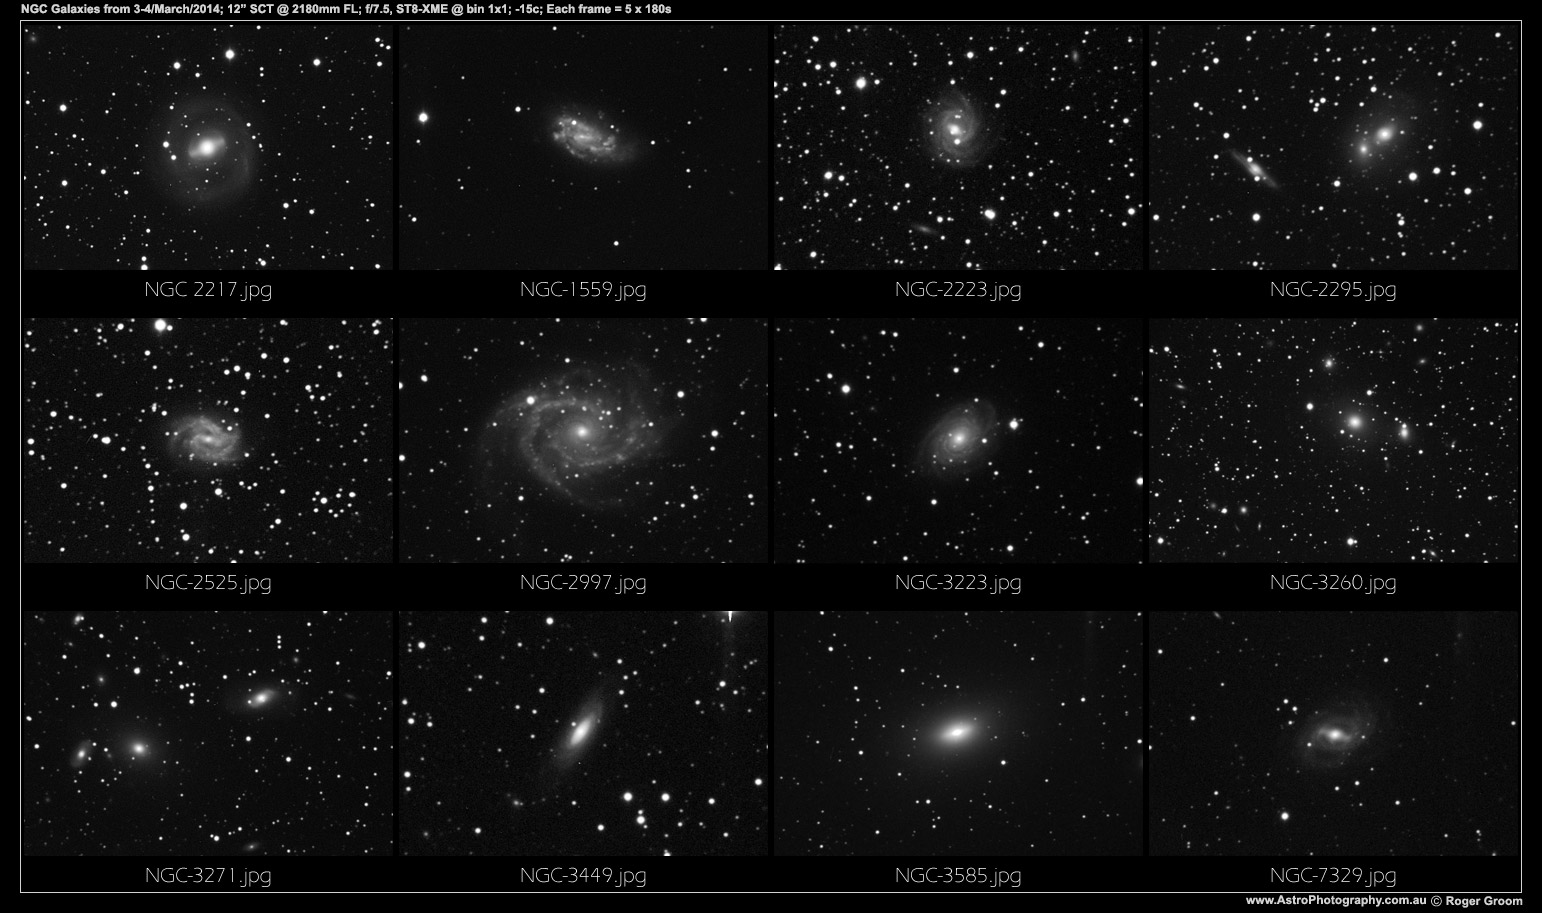 NGC Galaxies 5th March 2014